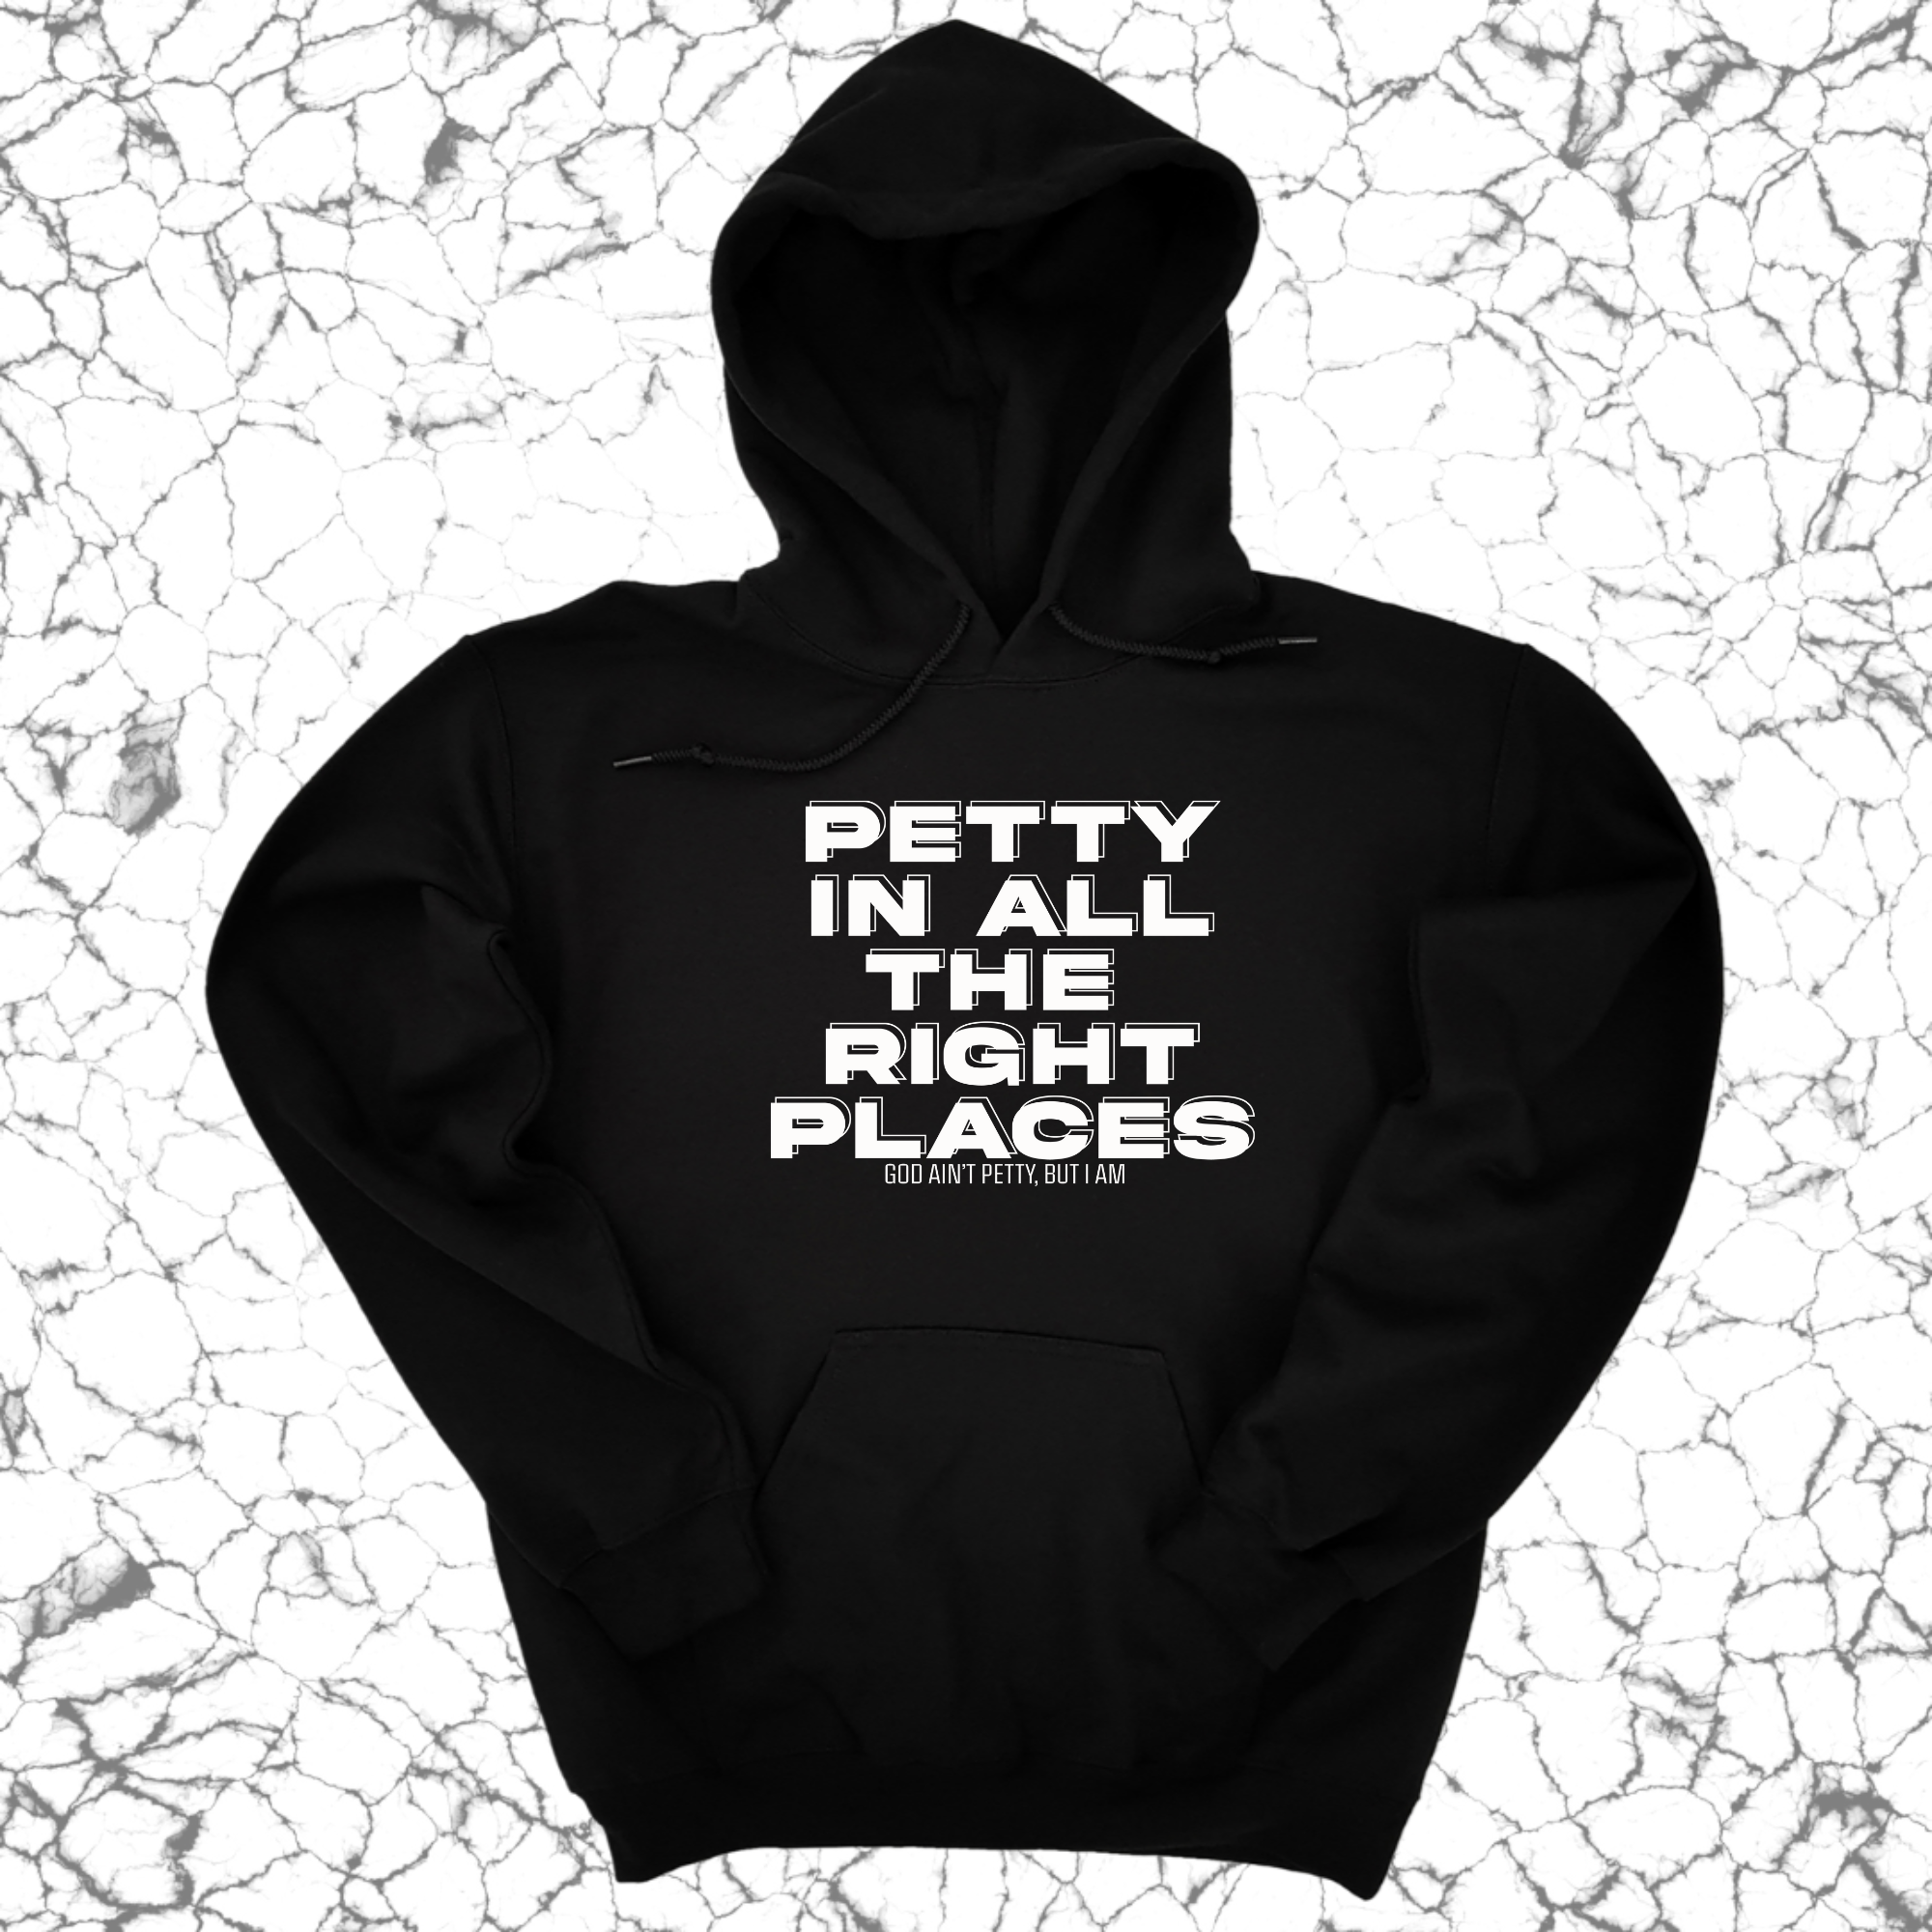 Petty in All the Right Places Unisex Hoodie-Hoodie-The Original God Ain't Petty But I Am